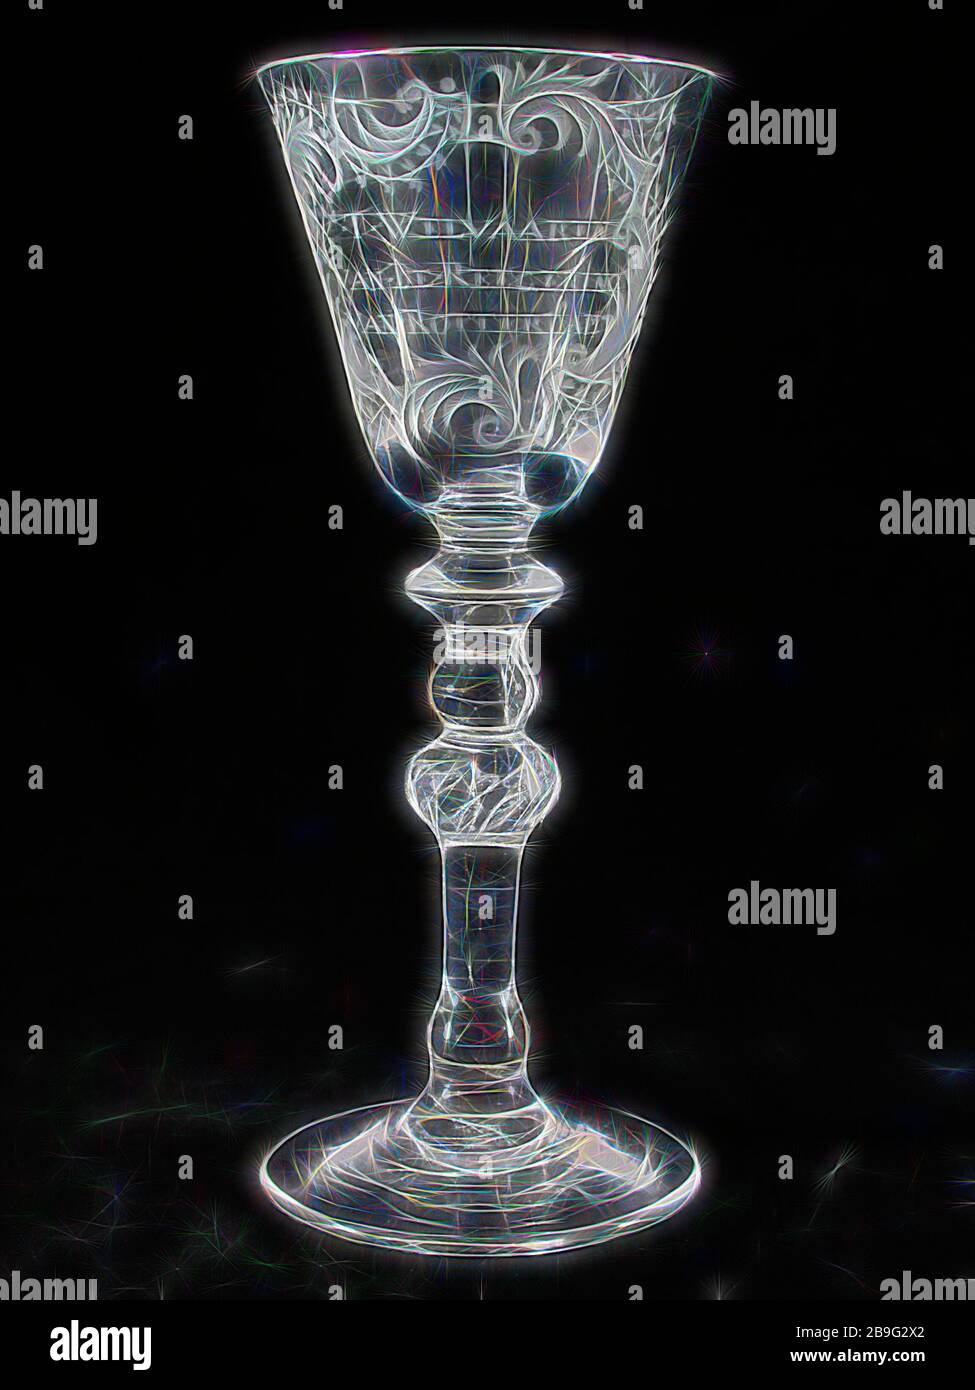 Chalice glass engraved with 'T. Welcoming. The. Reegering of Rotterdam, wine glass drinking glass drinking utensils tableware holder glass glass, gram free blown and formed radgraving, Goblet wineglass in clear colorless glass Pontil mark under round light ascending hollow base From two parts made of solid balustere: bottom part with convex knot to baluster knot with rounded drop-shaped air bubbles; upper part with two stacked buttons lower with eccentric entrapped air bubble Bottom rounded funnel-shaped chalice with fire-rounded edge 'T Welvaaren van. The Reign of Rotterdam Rotterdam Van Nell Stock Photo